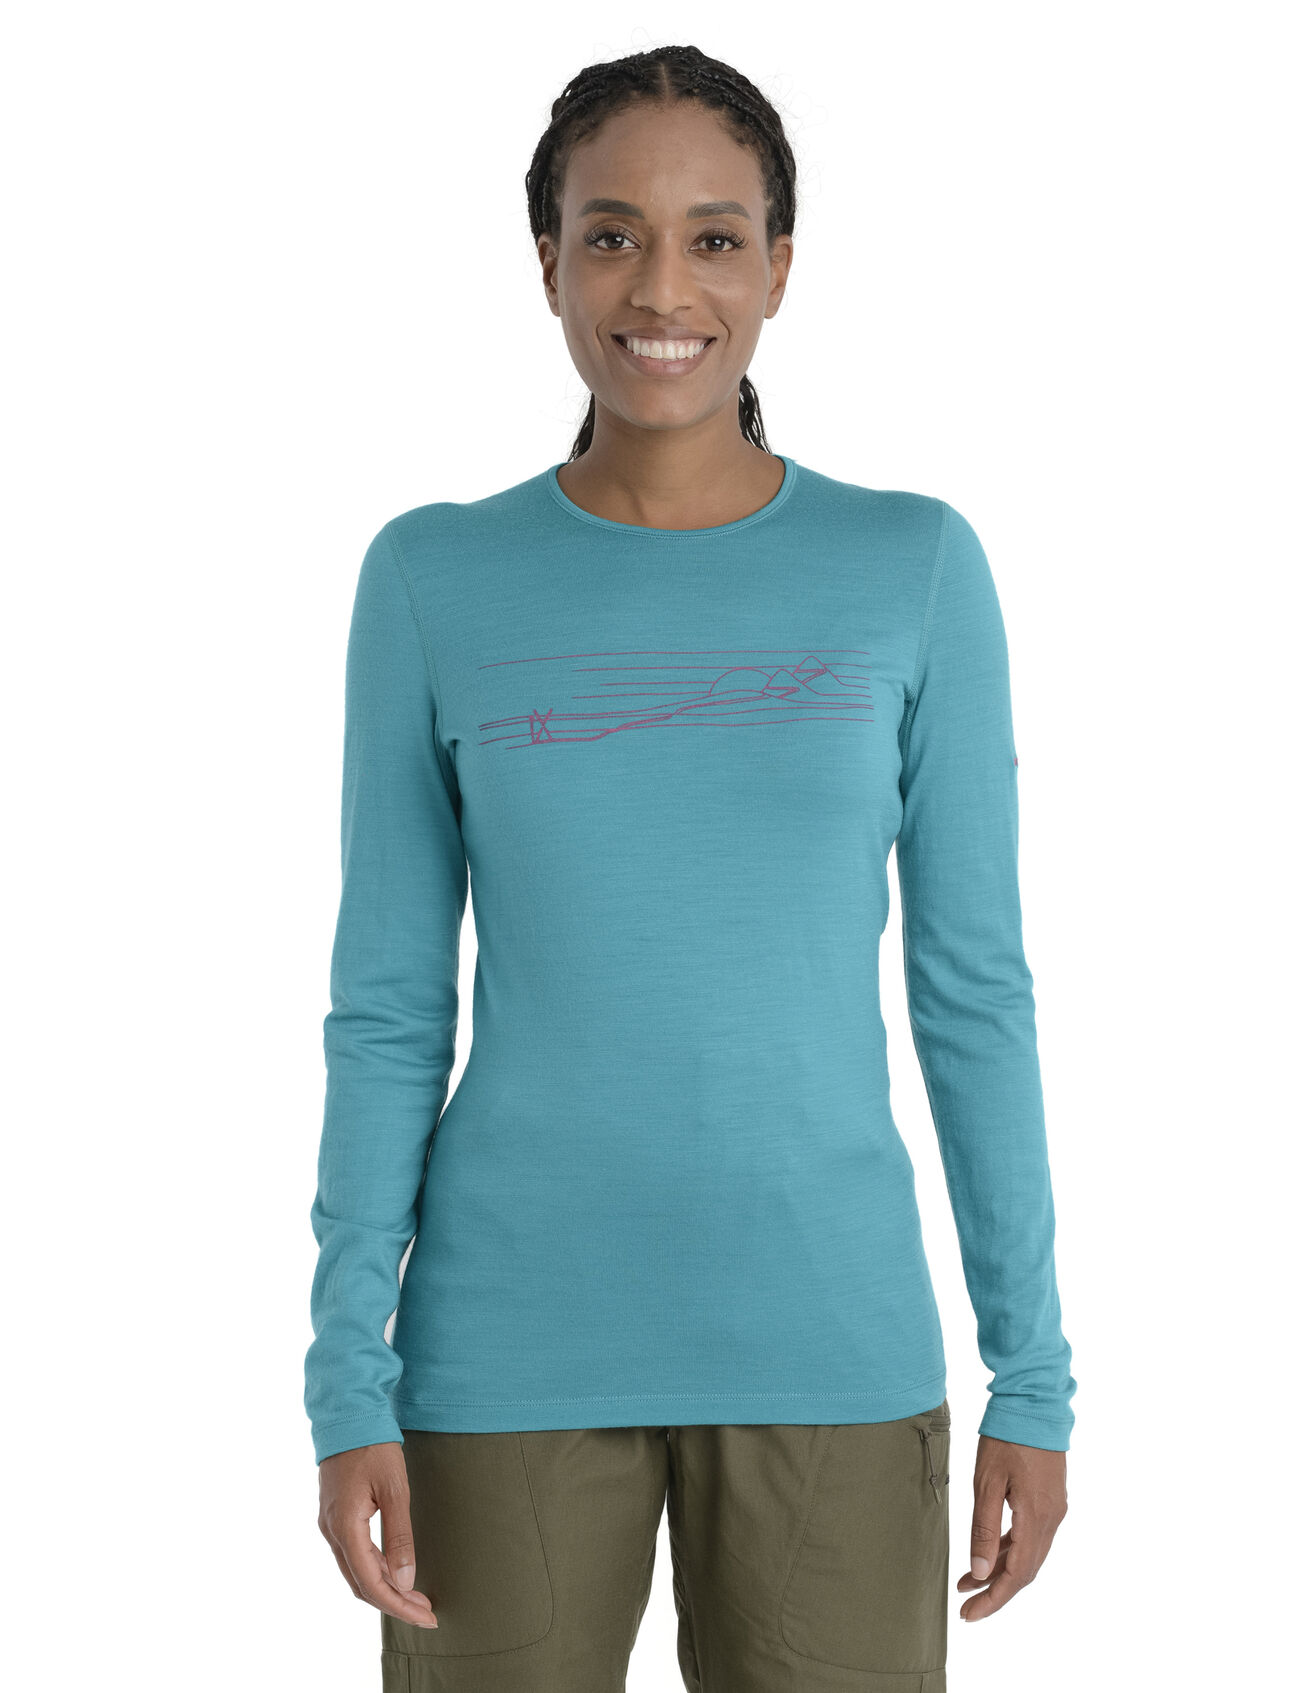 Womens Merino 200 Oasis Long Sleeve Crewe Thermal Top Ski Stripes The benchmark against which all others are judged, the 200 Oasis Long Sleeve Crewe Ski Stripes features our most versatile merino jersey fabric for year-round layering performance across any activity. The original graphic artwork by Damon Watters features a classic alpine powder run.